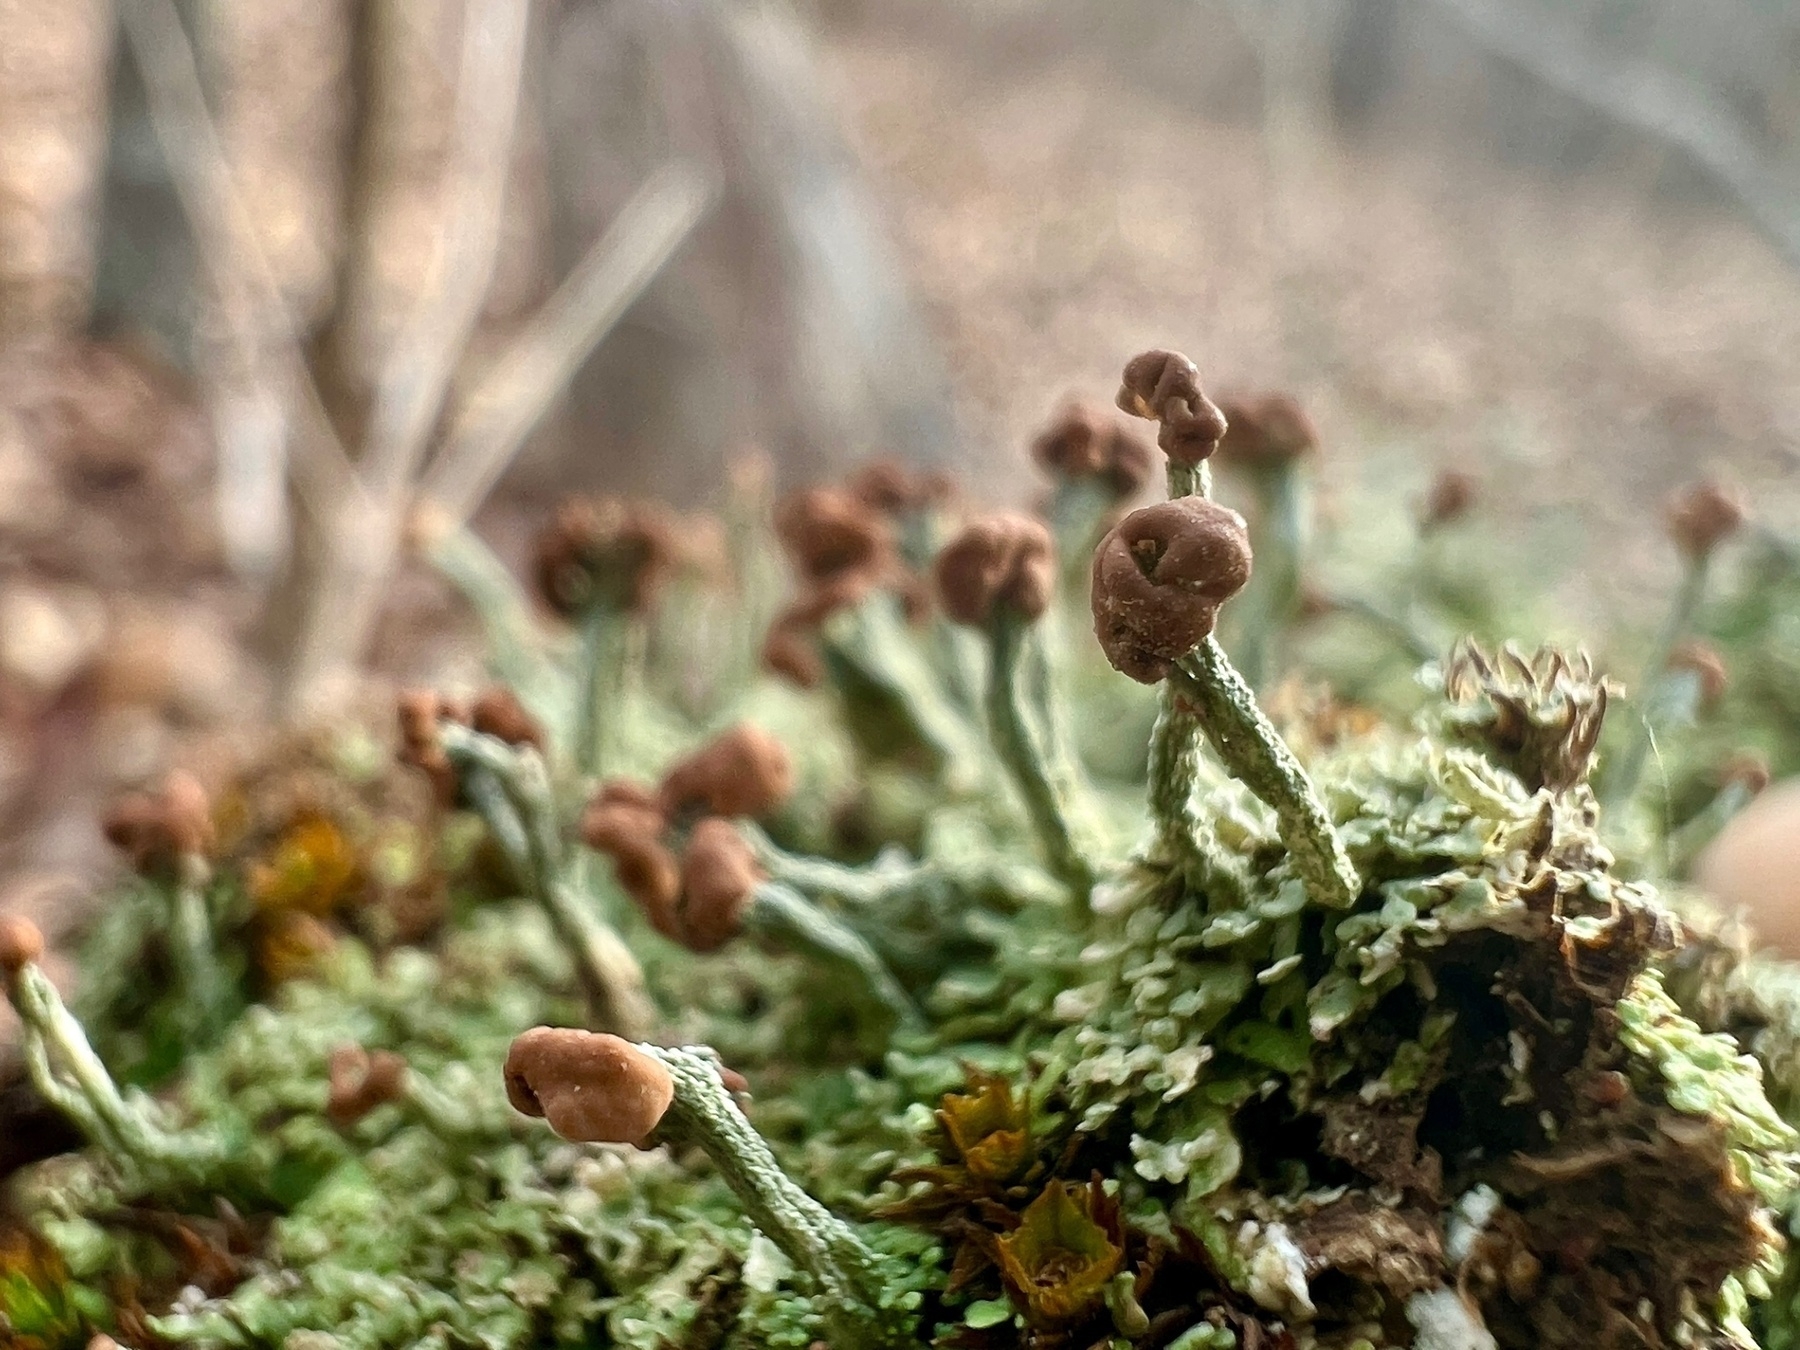 Macro image of small pale green lichen with dark brown caps on top. Blurred in the background are many more such lichen creating a miniature forest. Further in the blurred background is the actual forest of trees.